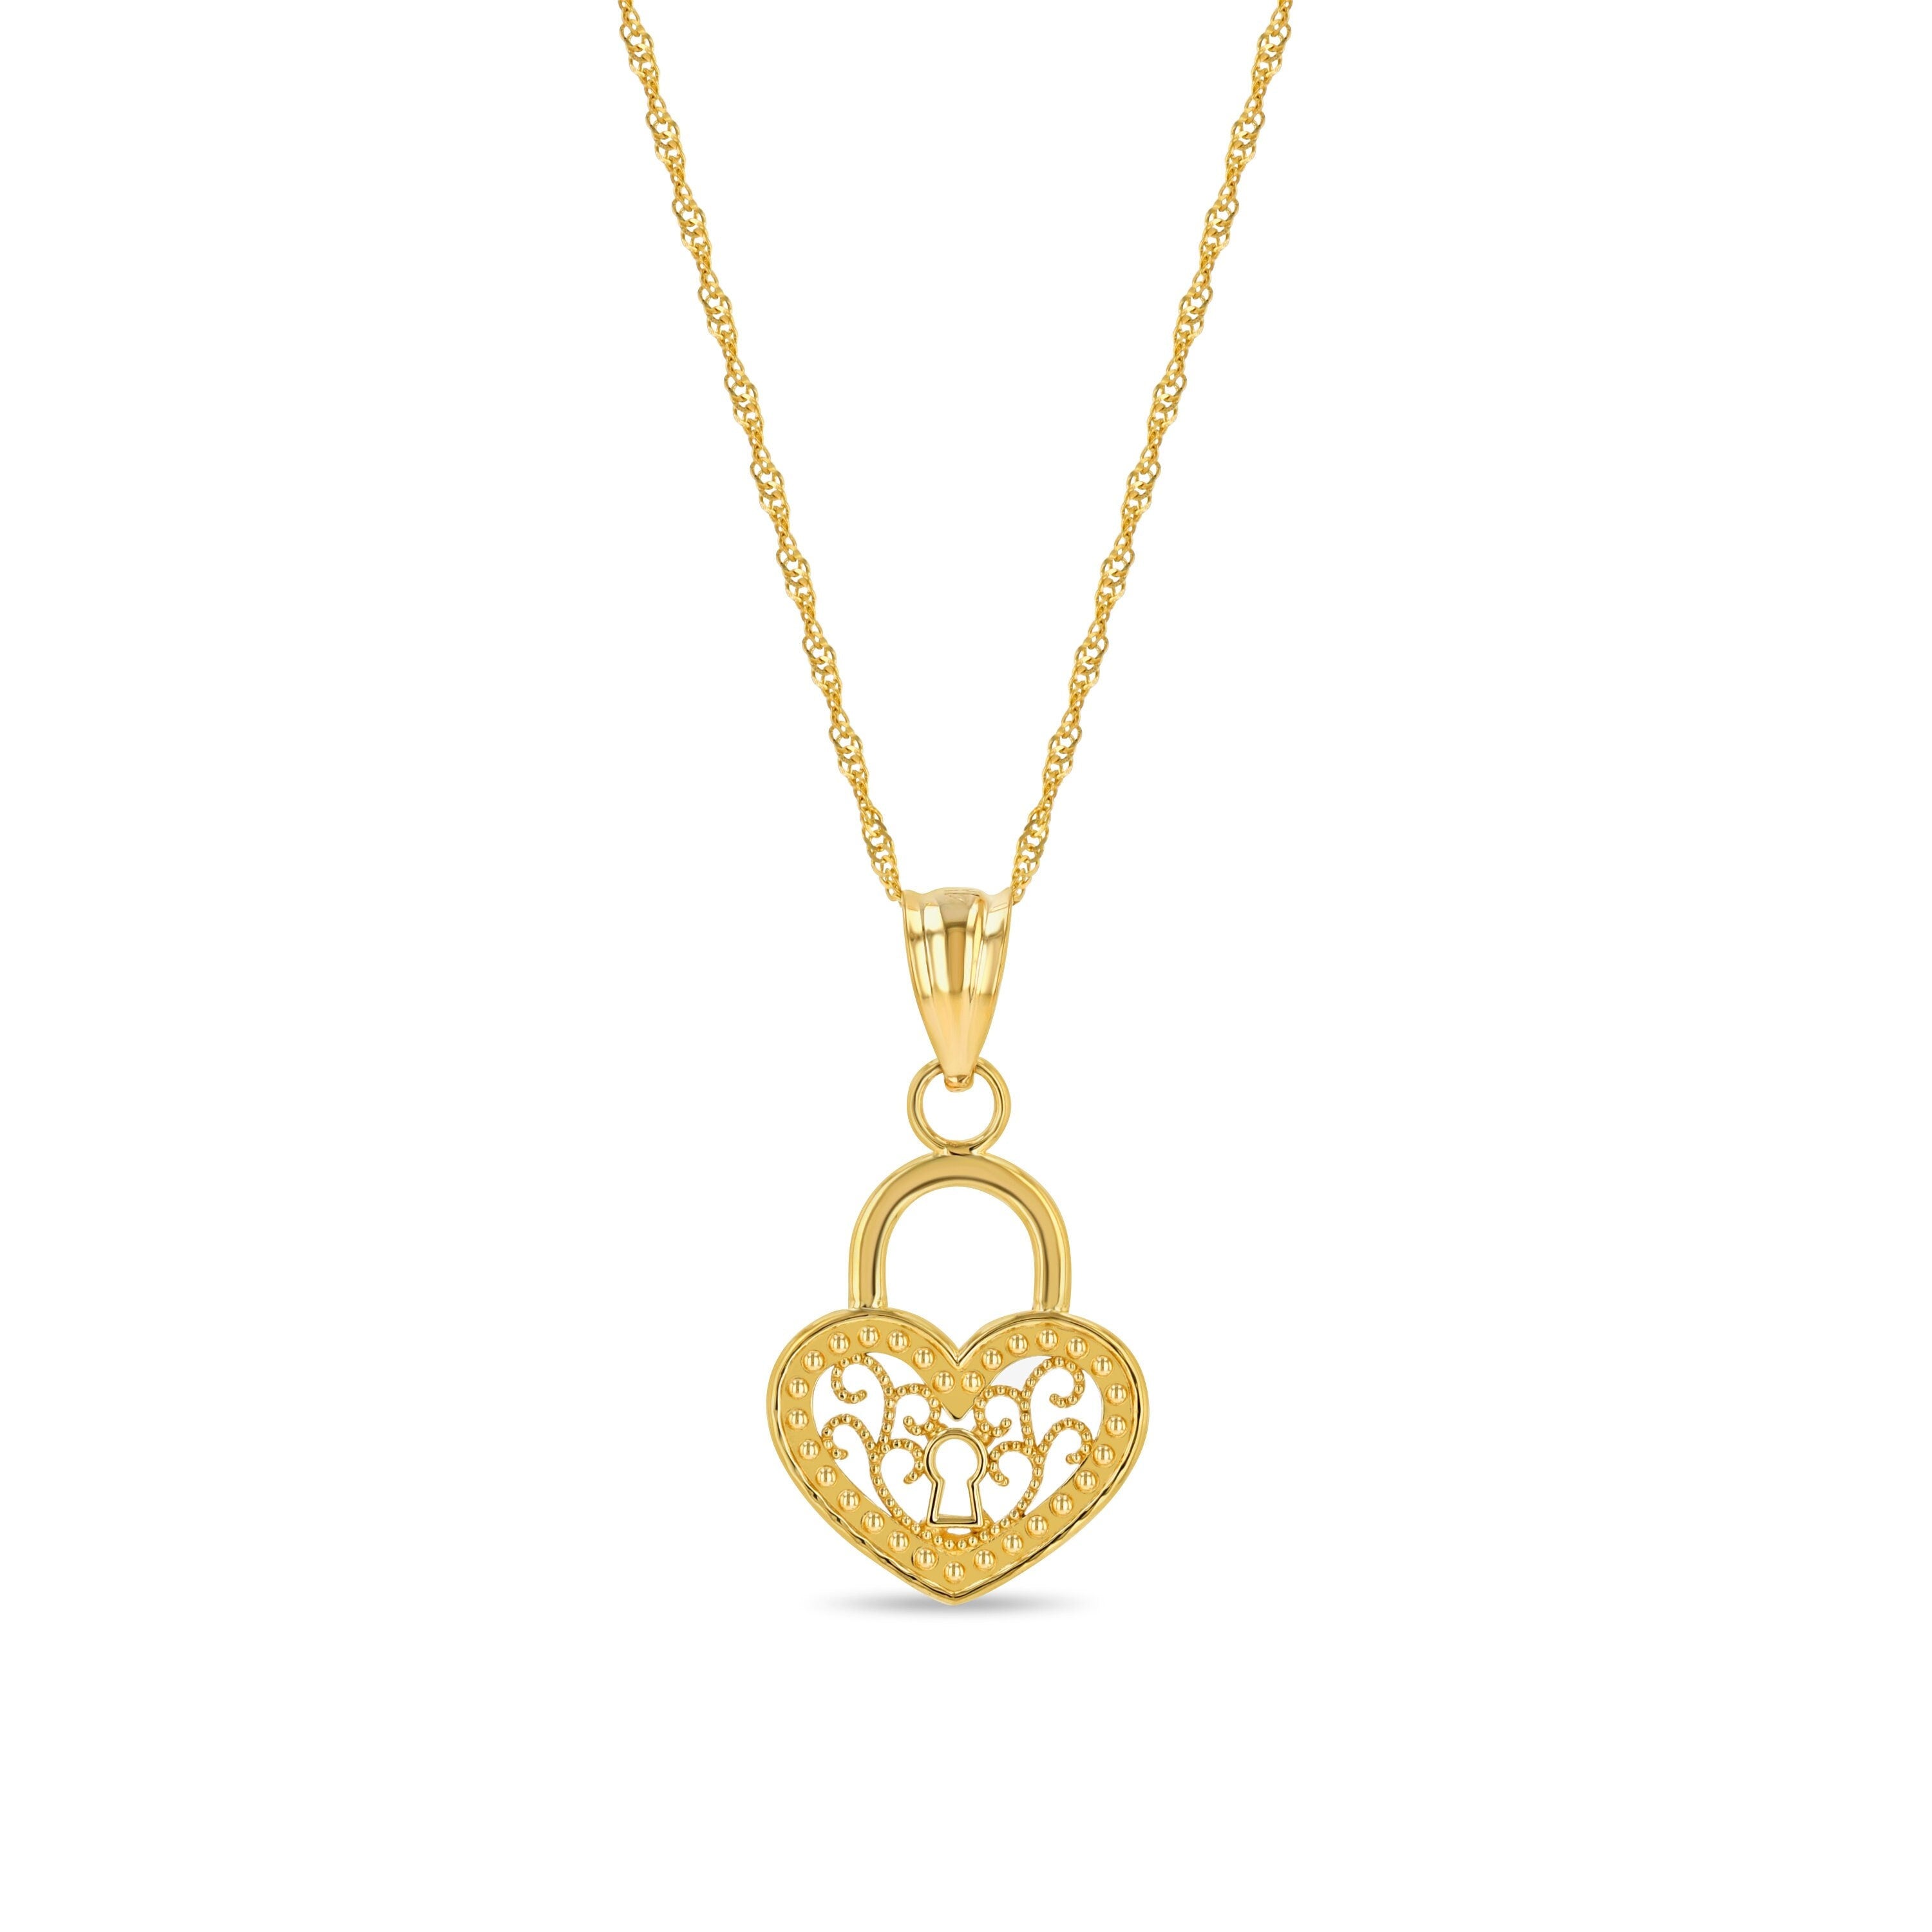 14k solid gold filigree heart pendant on 18" solid gold chain